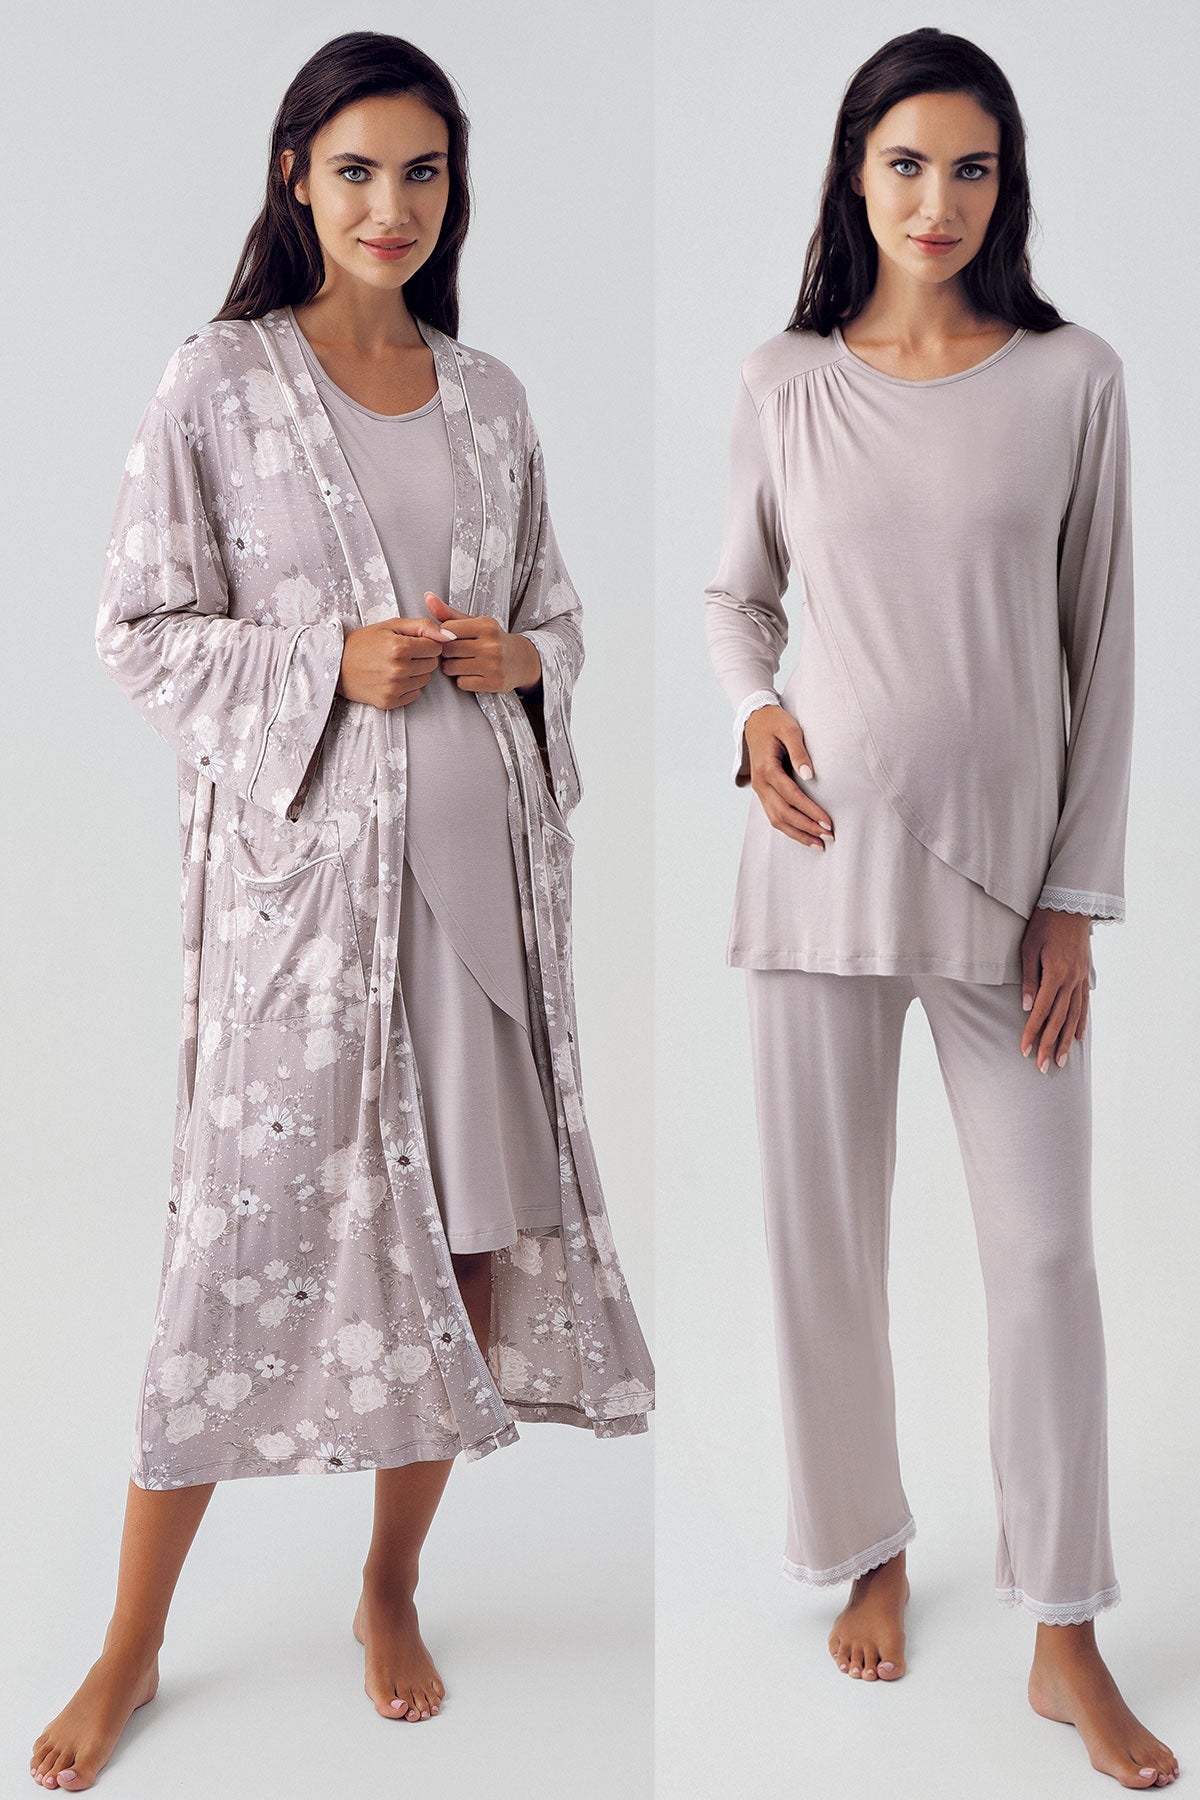 Shopymommy 409209 Flowery Wide Double Breasted 4 Pieces Maternity & Nursing Set Coffee